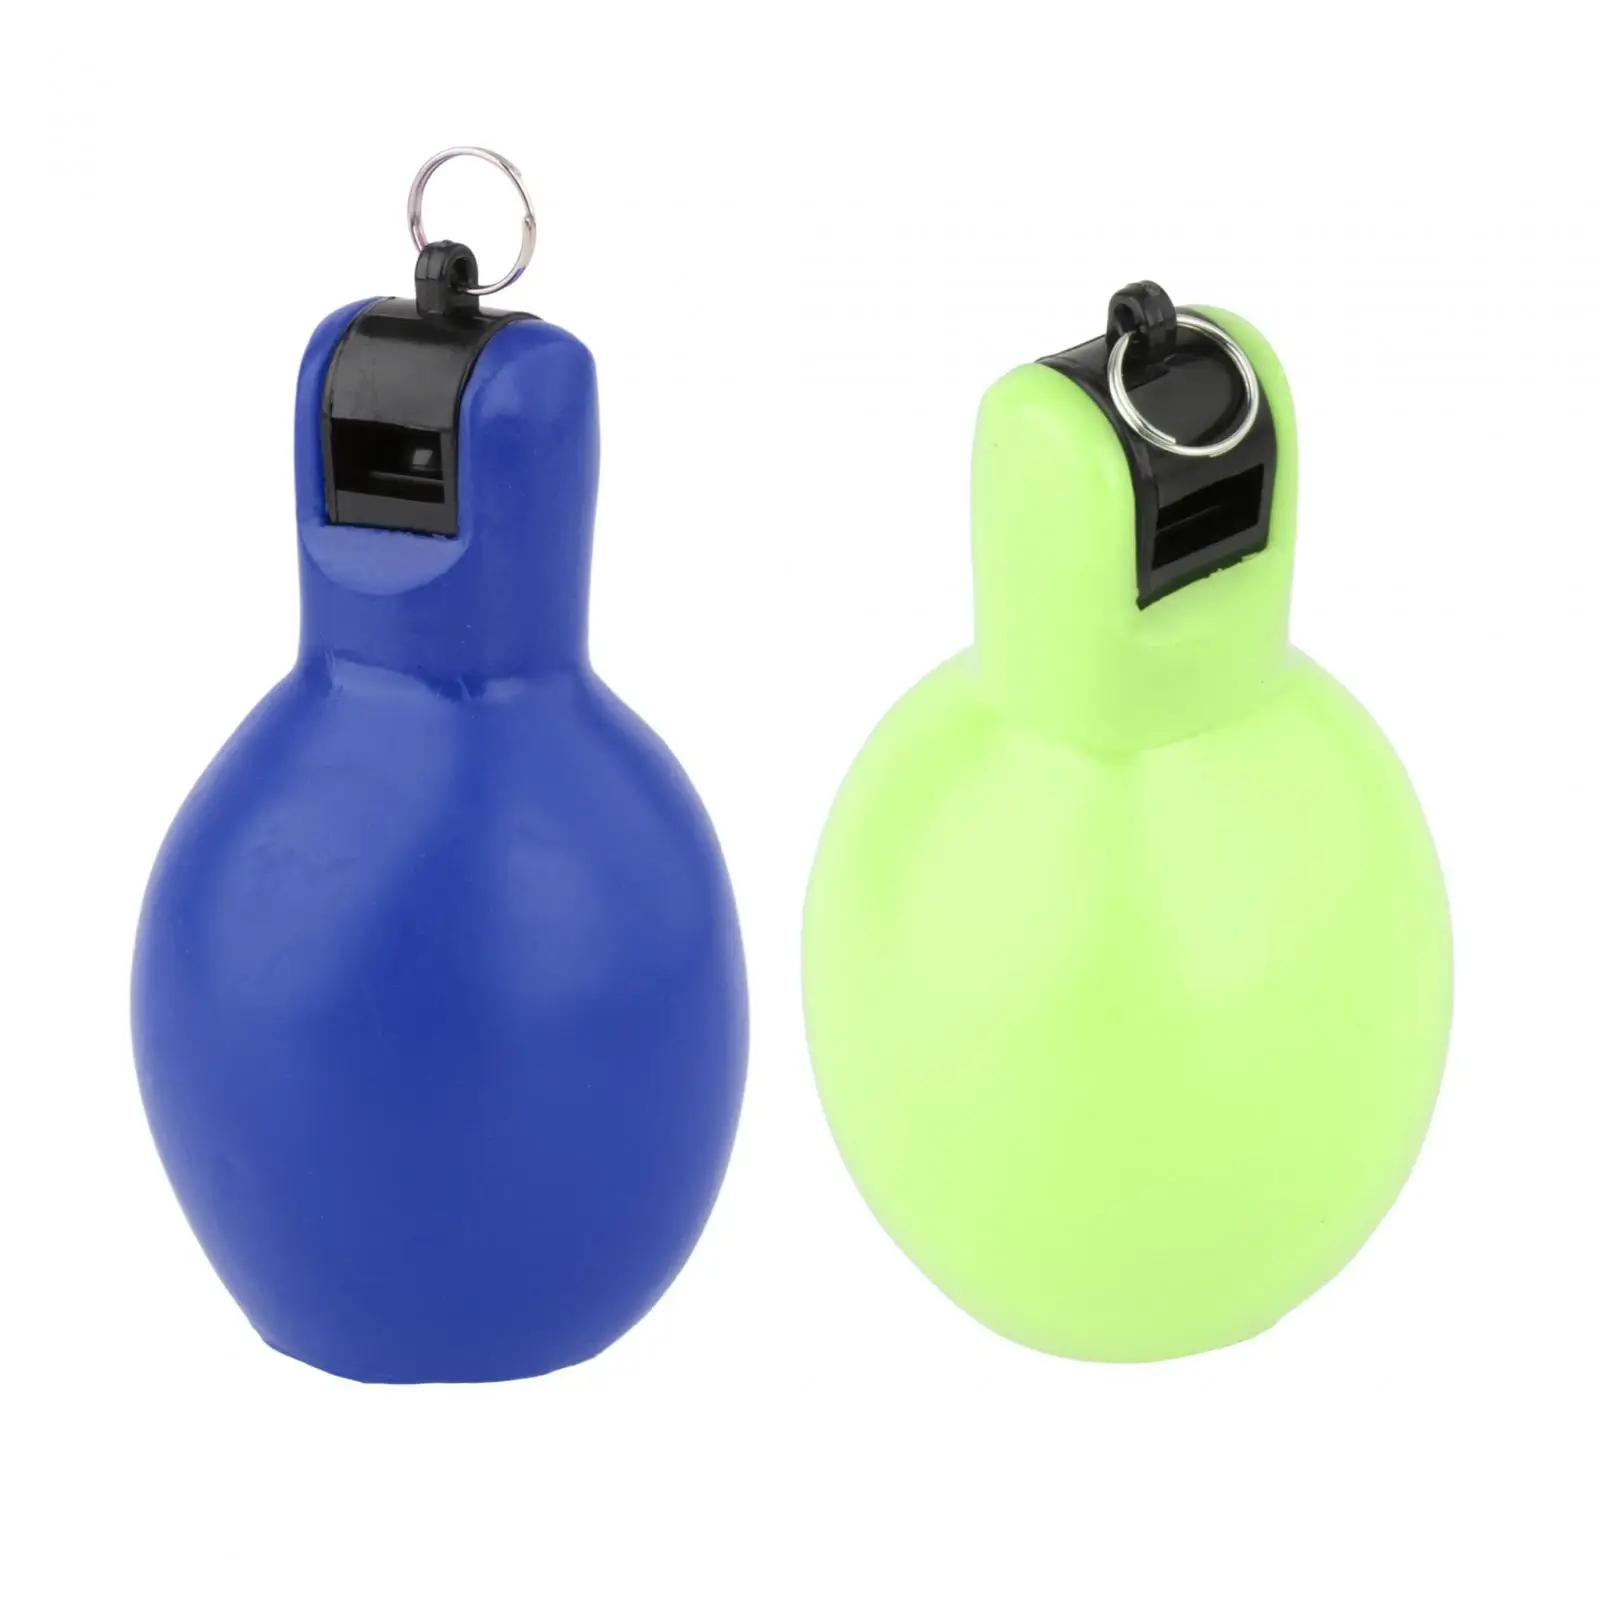 2x Hand Squeeze Whistles Trainer Whistle for Camping Indoor Outdoor Hiking